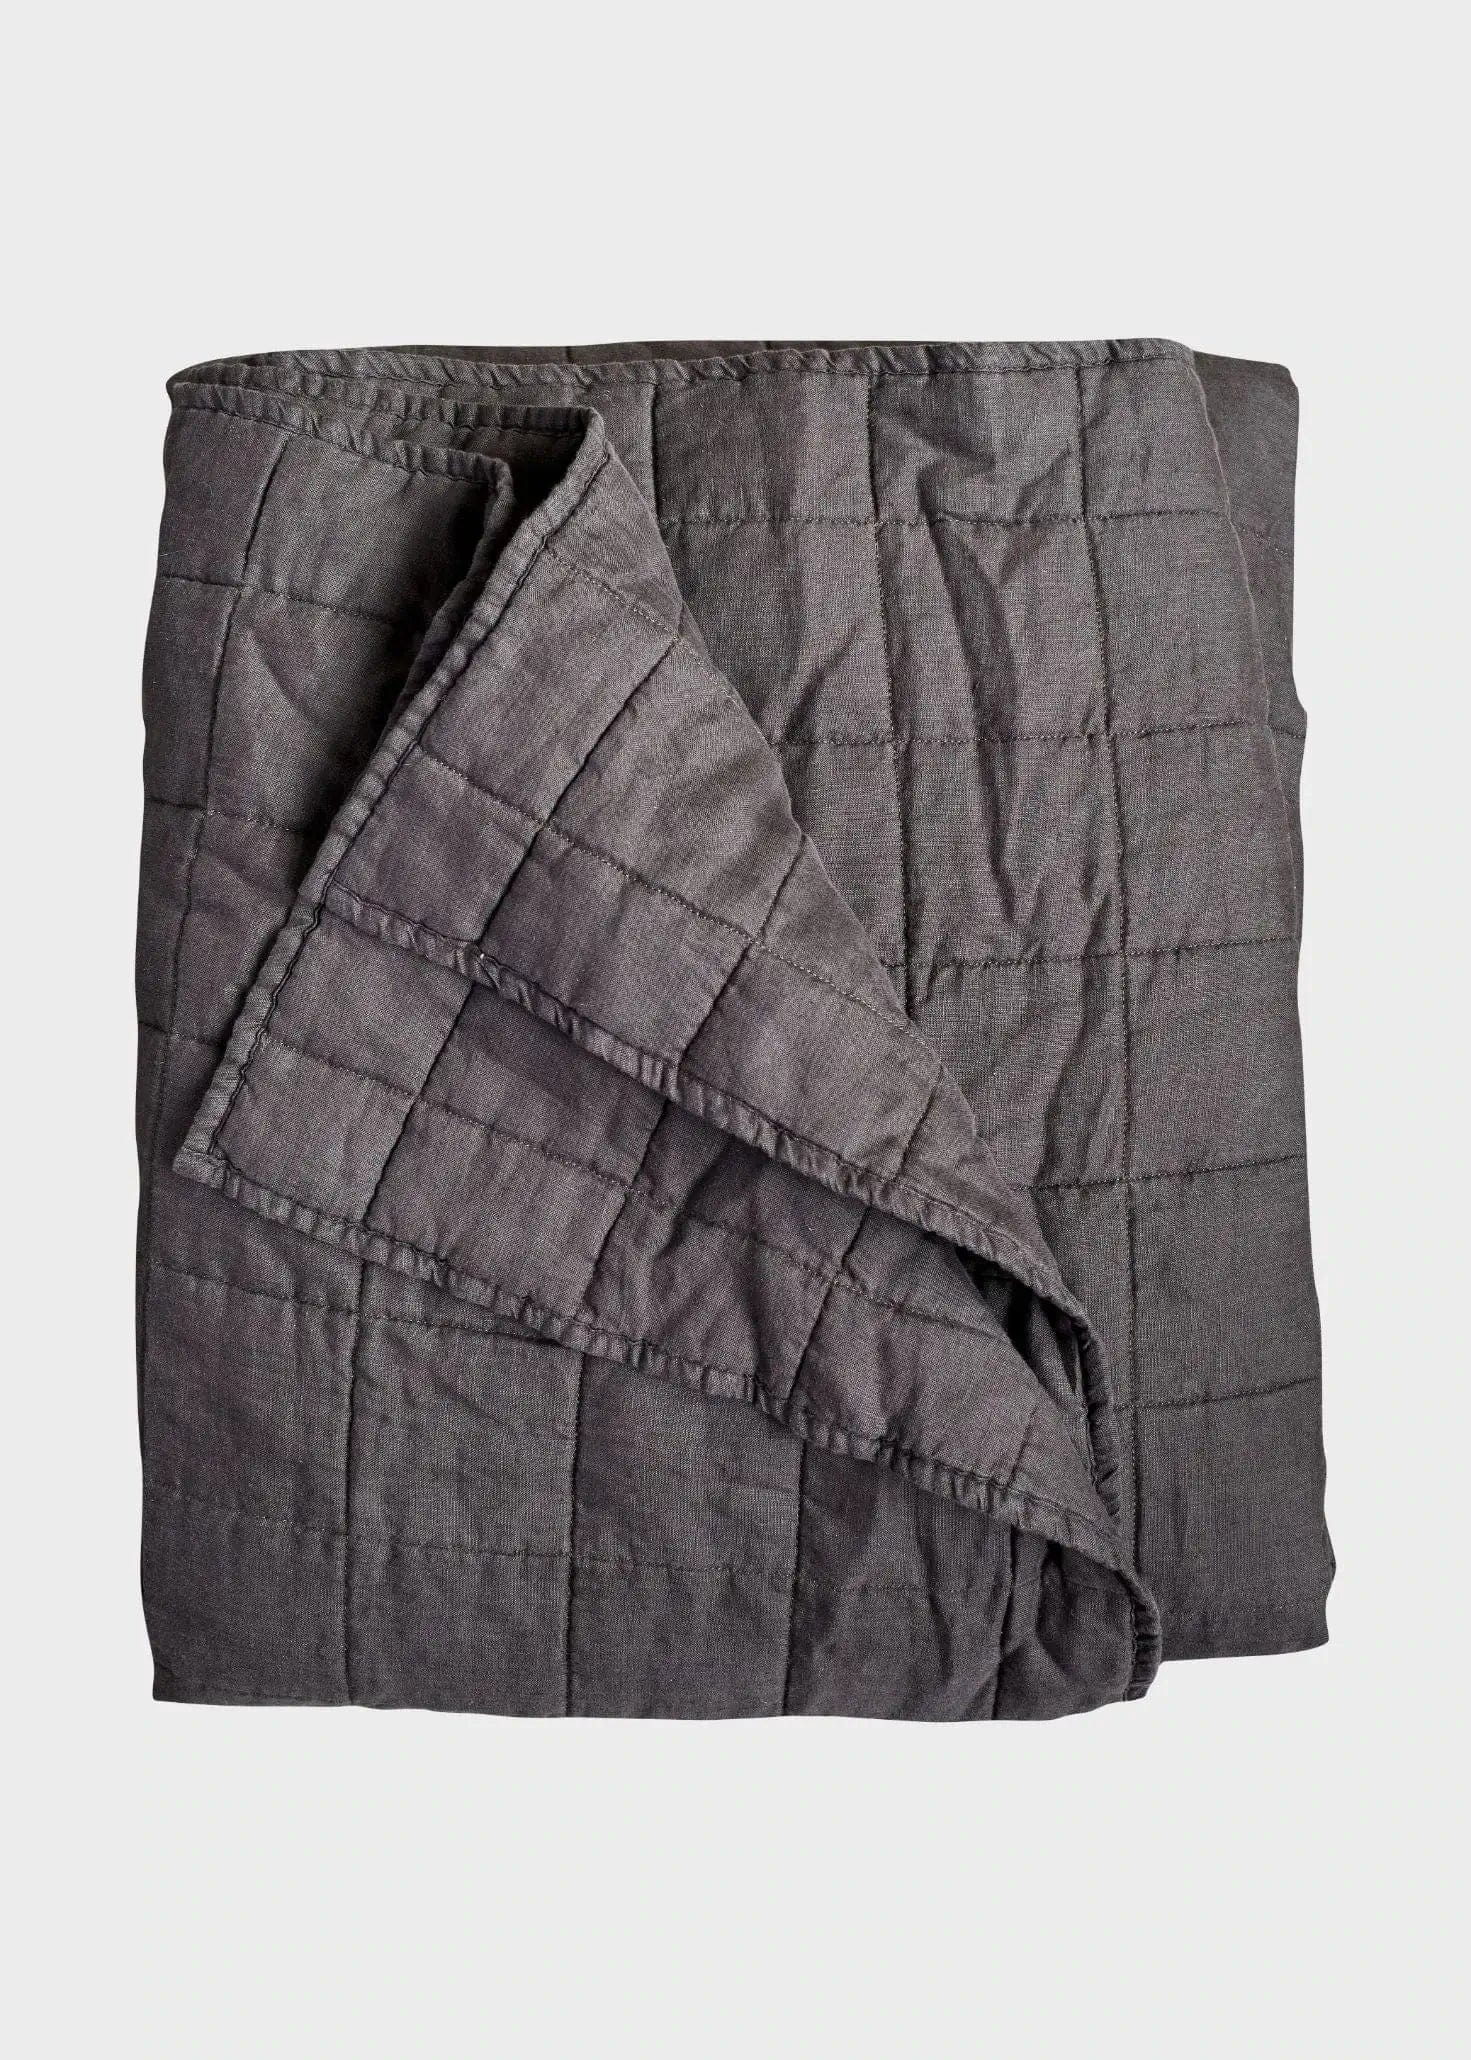 Charcoal Grey Stonewashed Linen Quilt